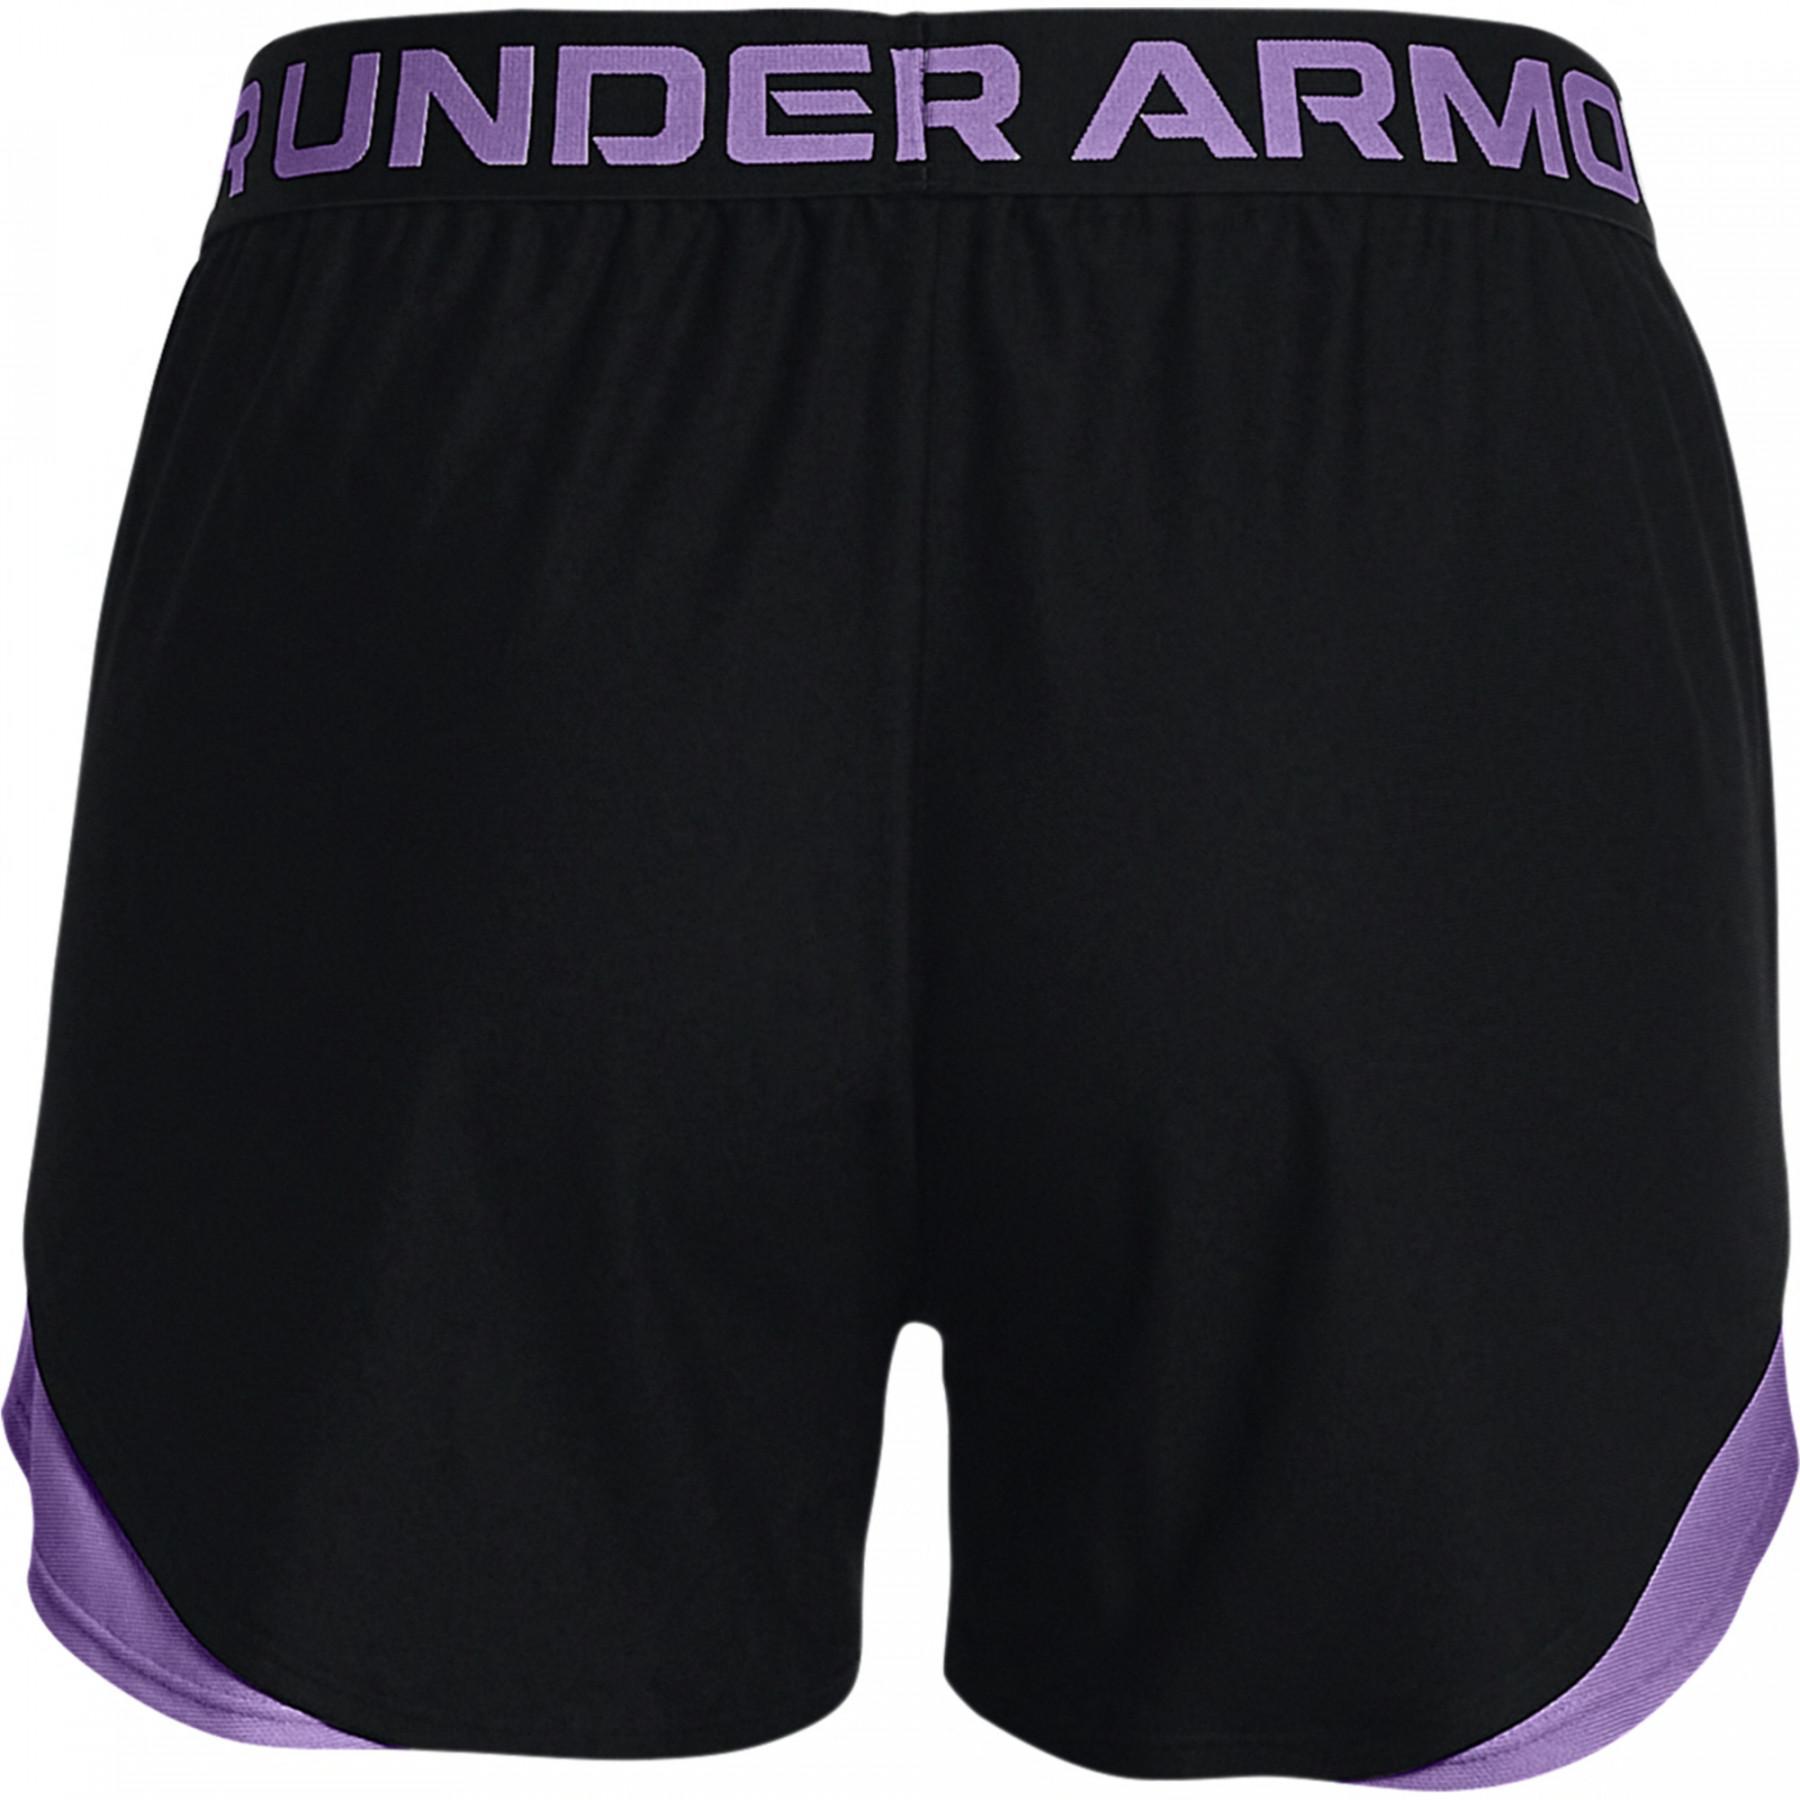 Women's shorts Under Armour Play Up 3.0 Geo